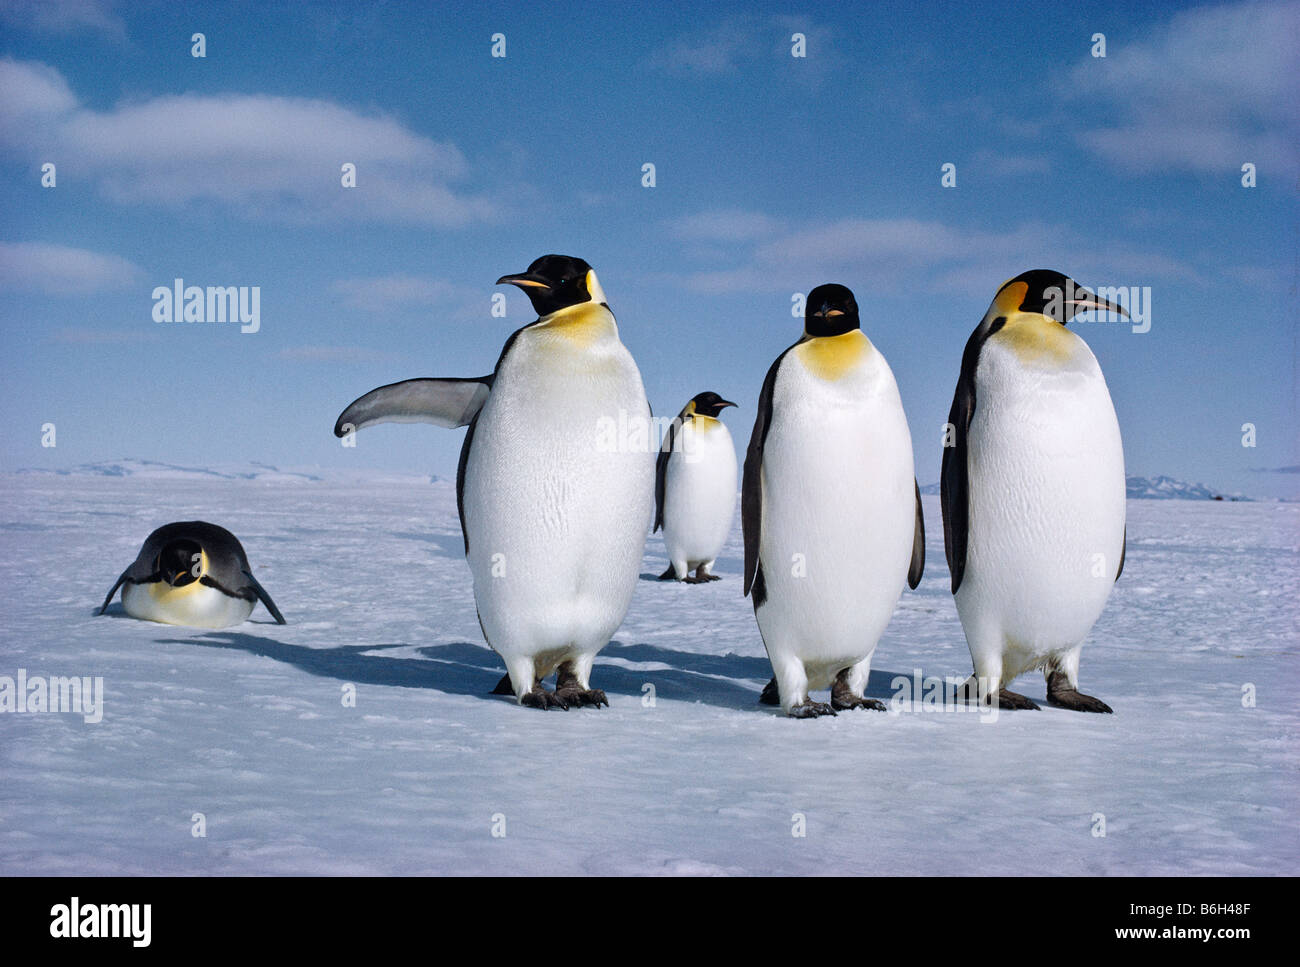 Aptenodytes forsteri, Emperor penguins, The male Emperor penguin holds the single egg on its feet for two winter months Stock Photo